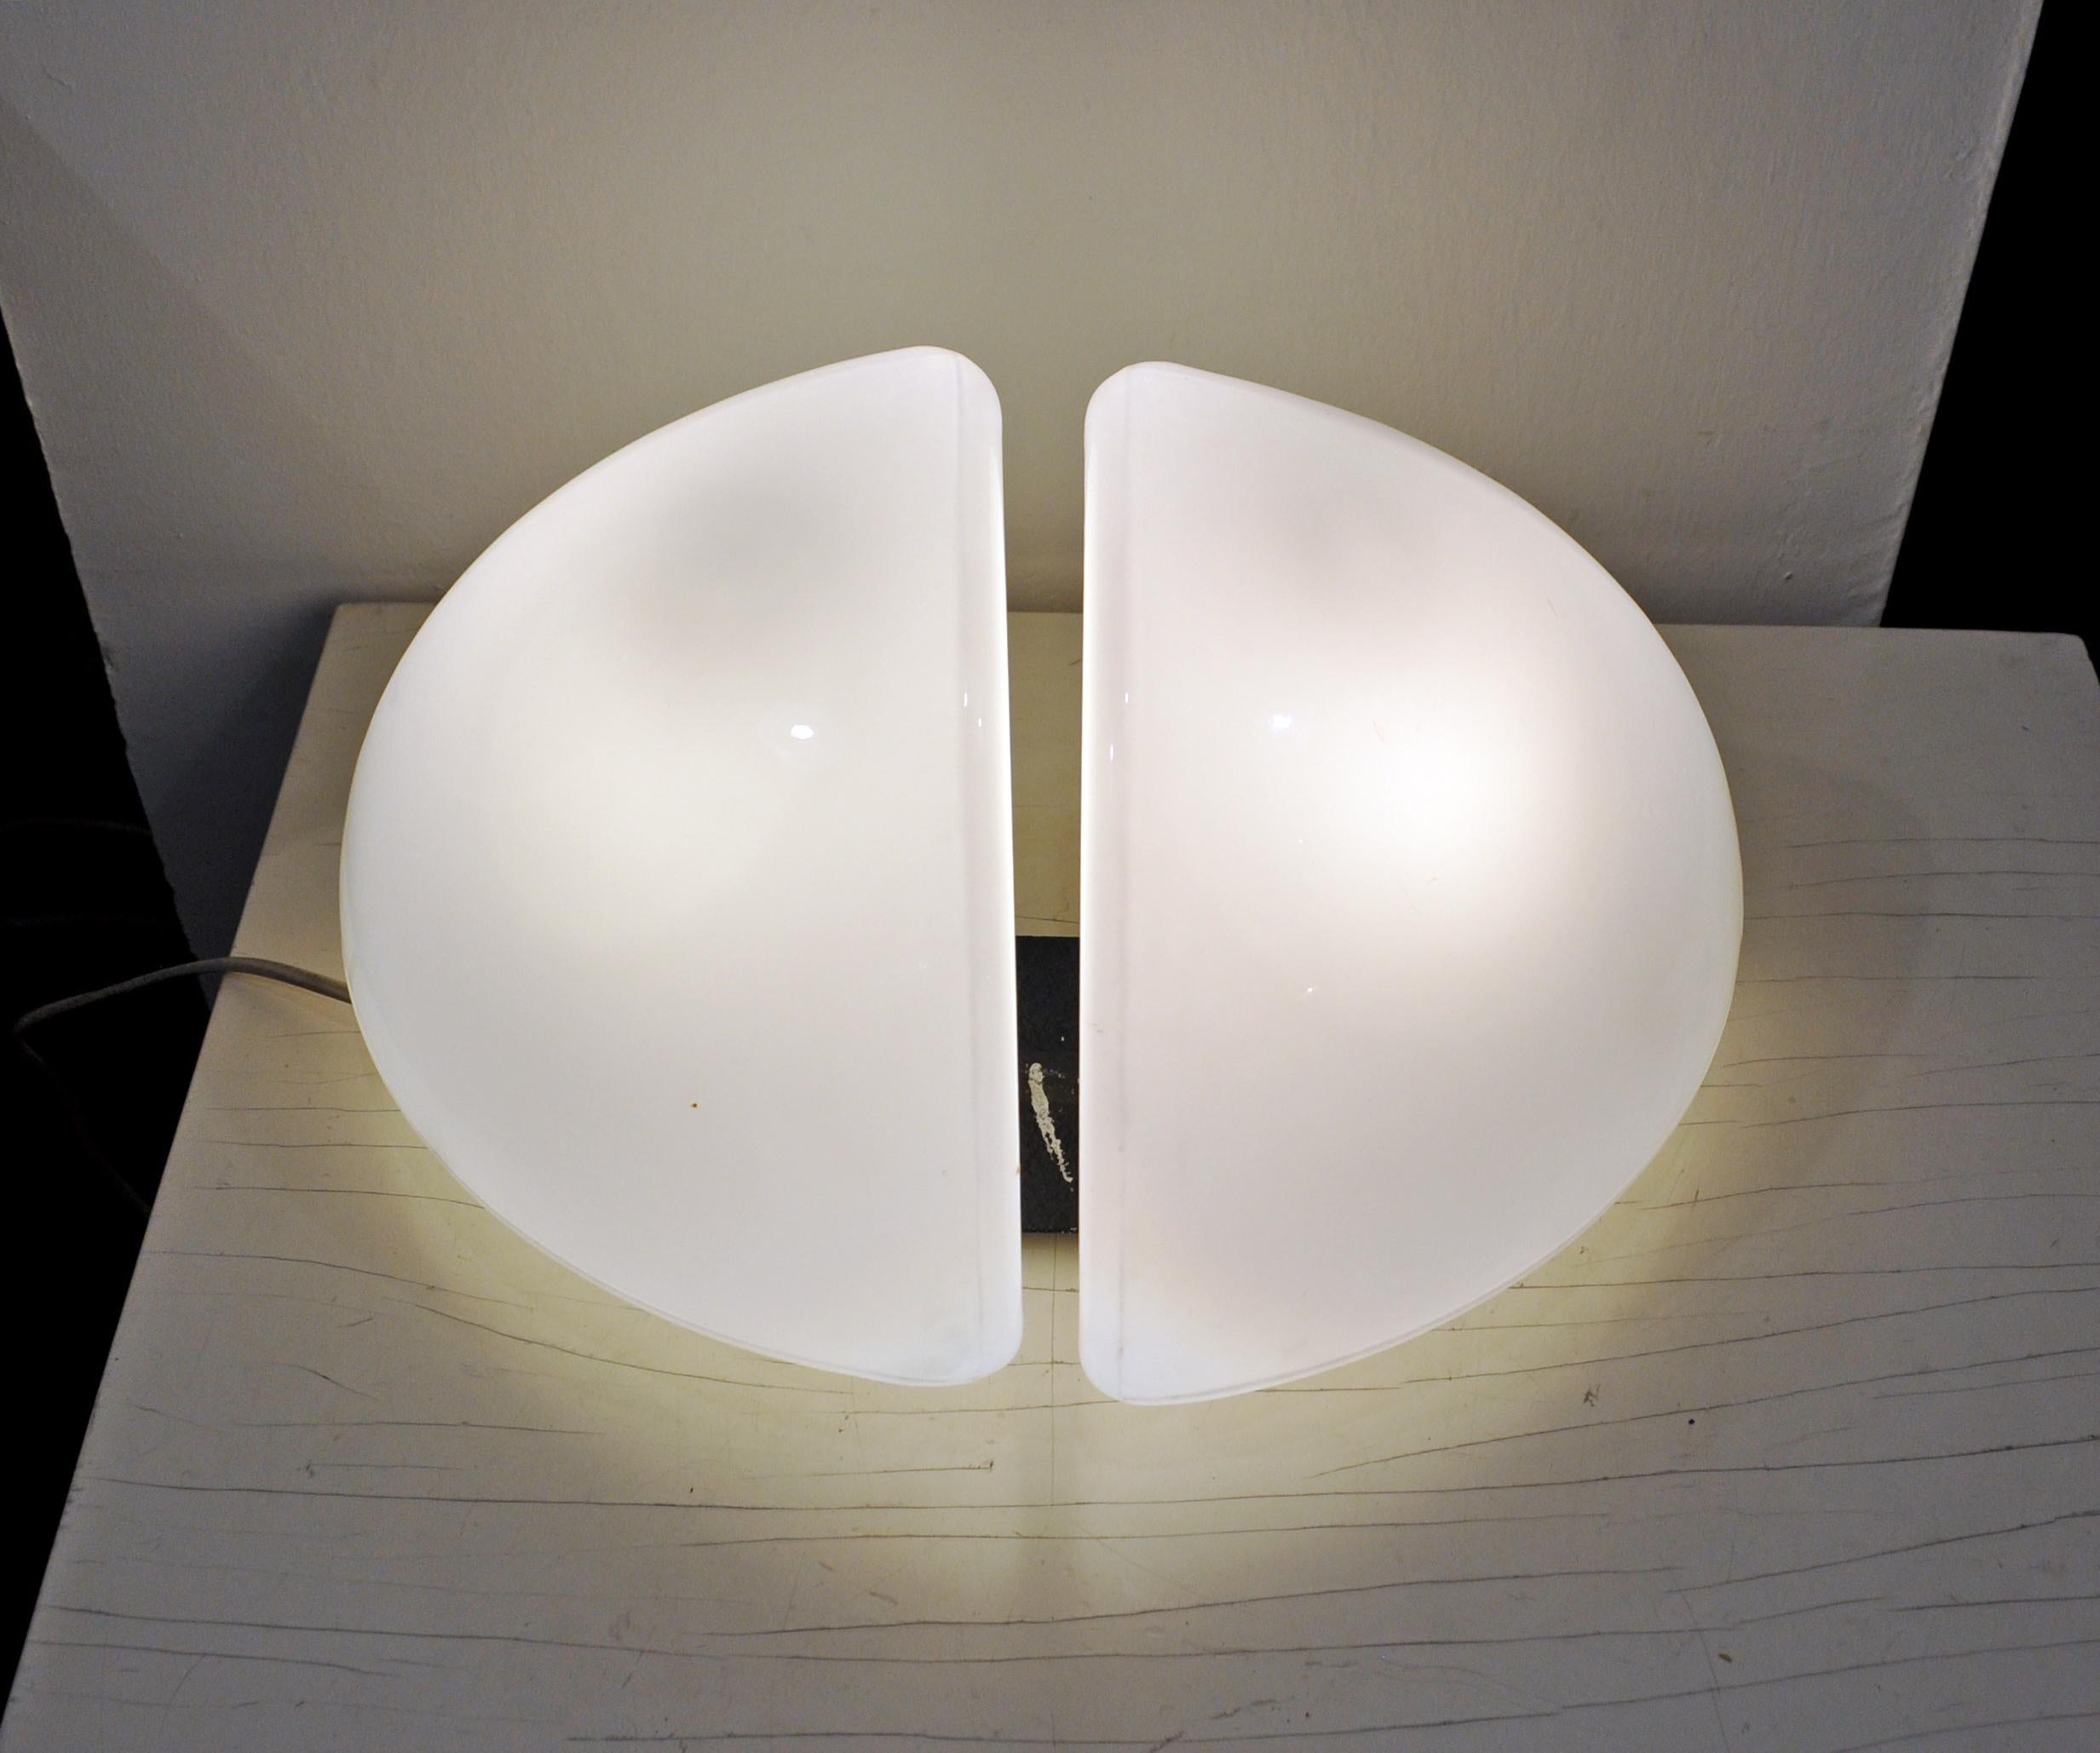 Pair of Wall Lamps Murano Glass by Giorgio De Ferrari VeArt, 1970s For Sale 1